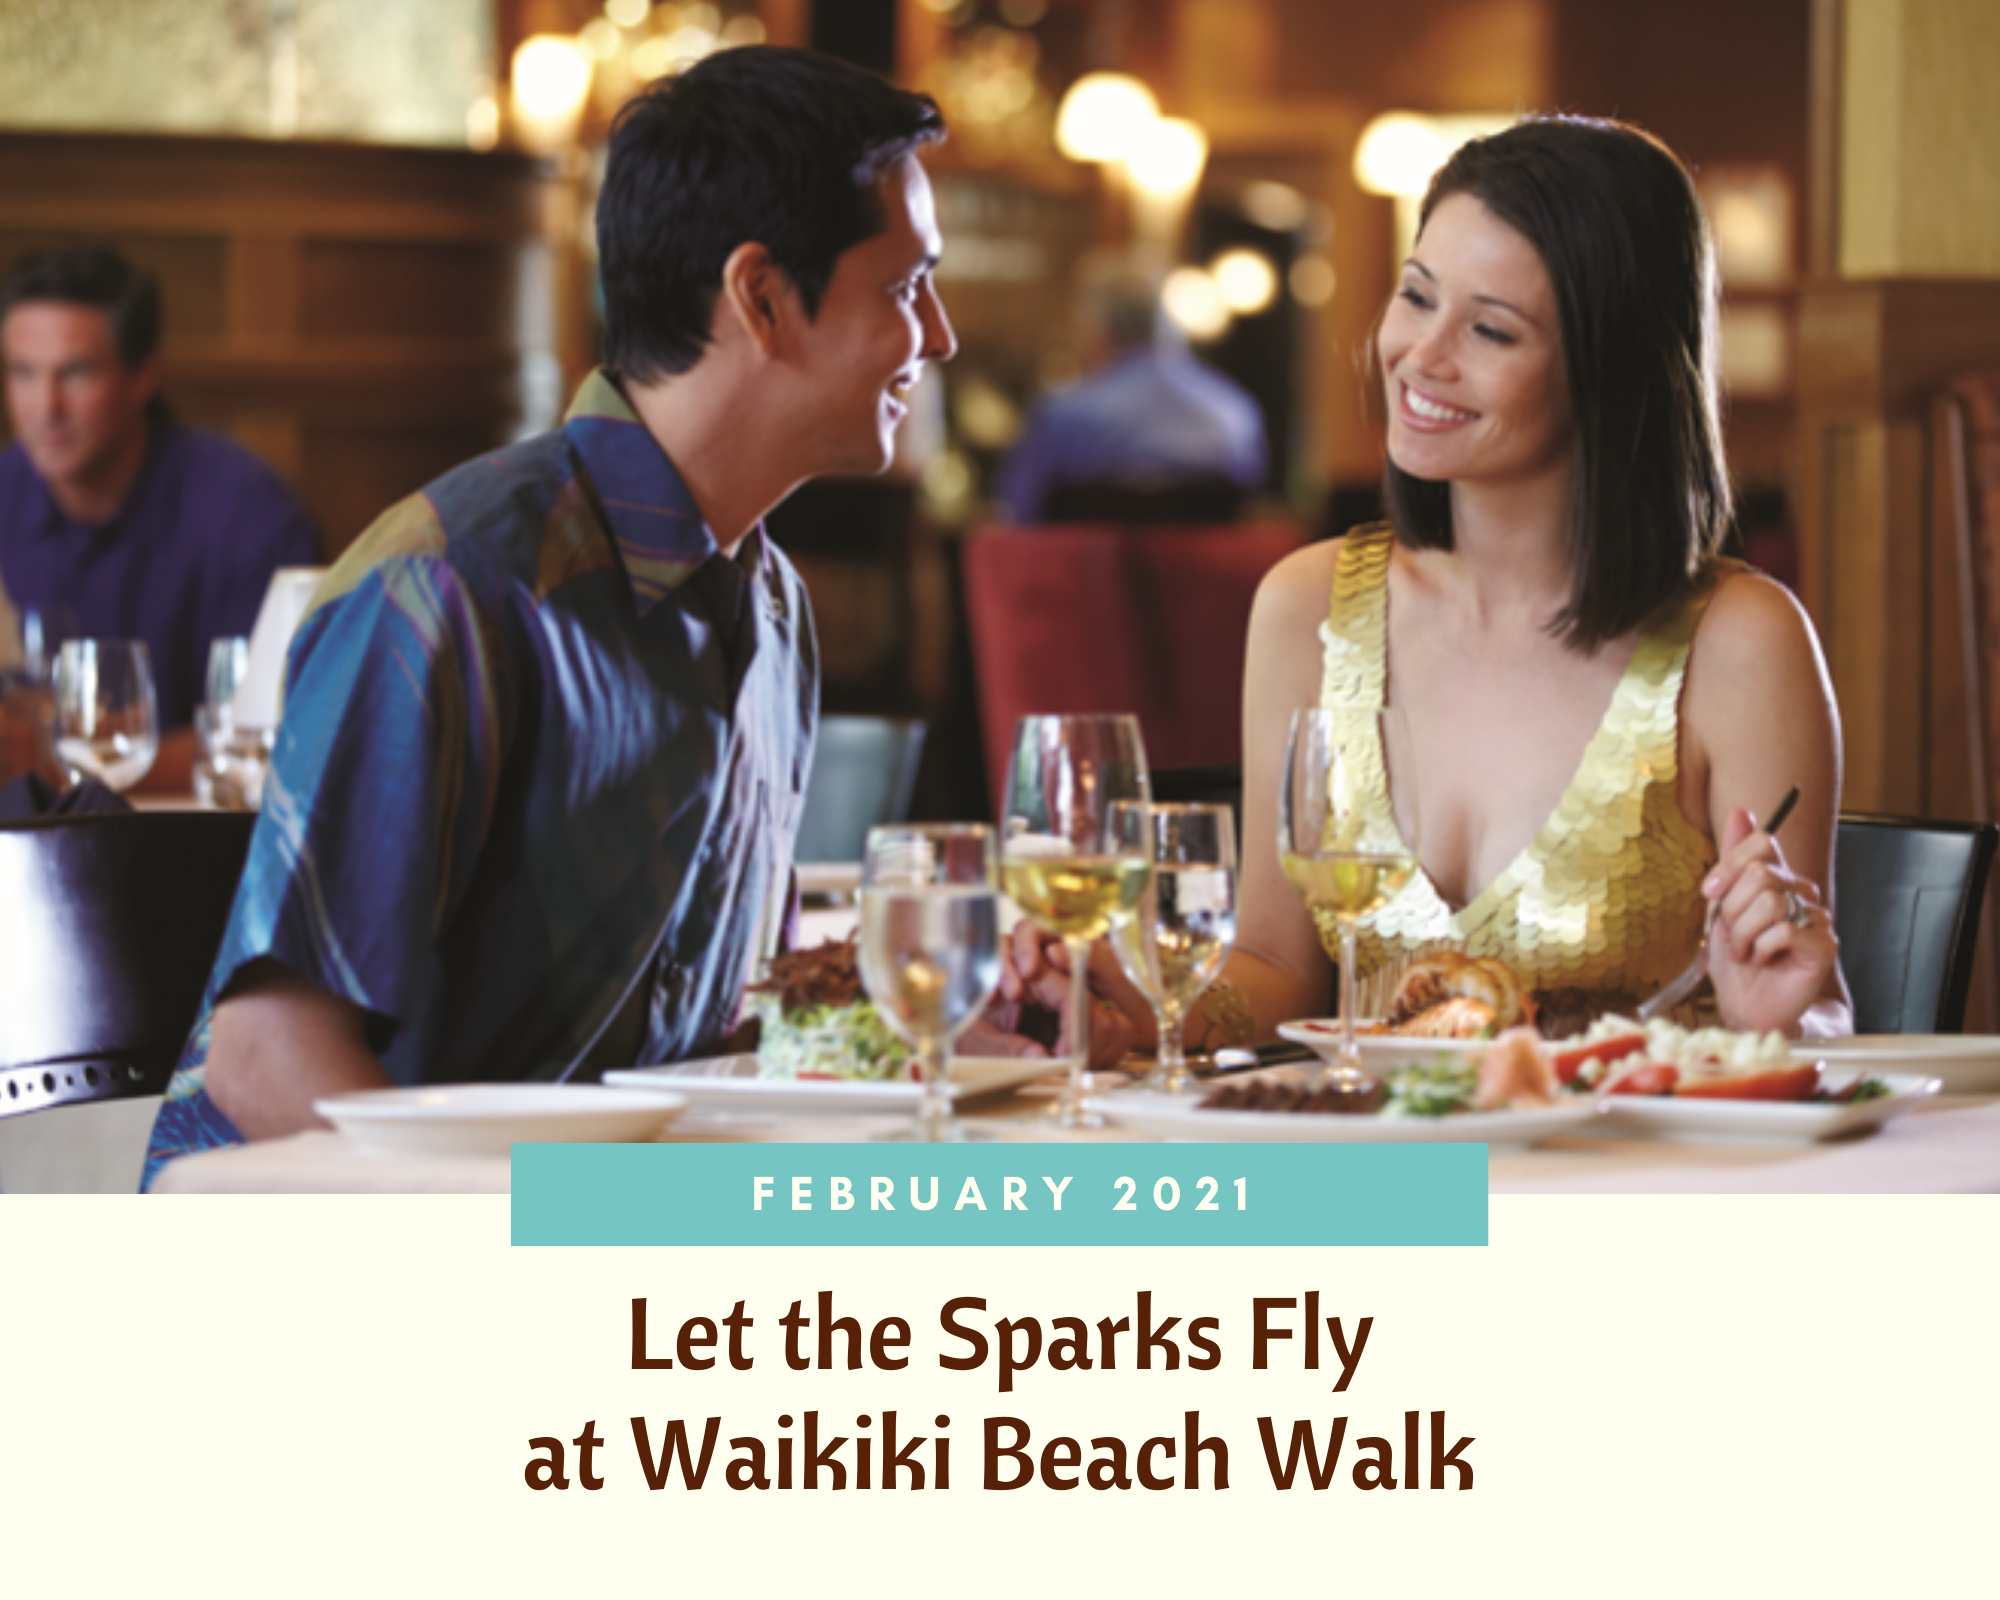 February 2021: Let the Sparks Fly at Waikiki Beach Walk